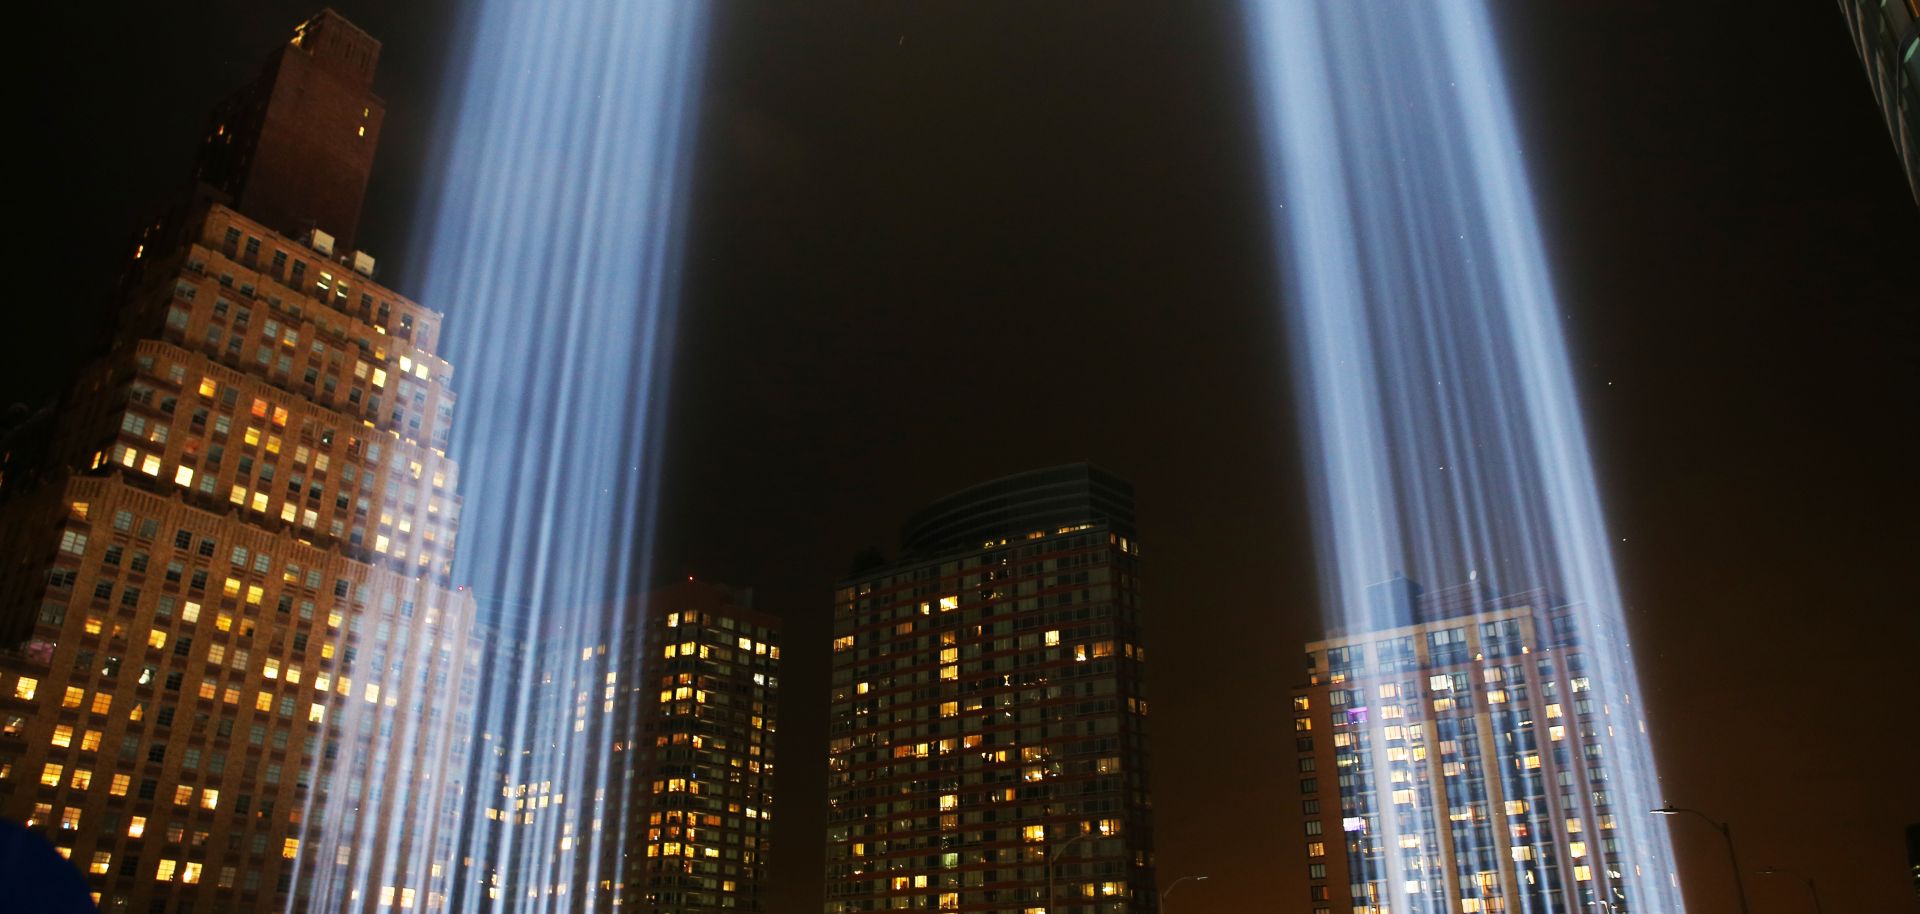 The Tribute in Light marking the 17th anniversary of the 9/11 attacks.